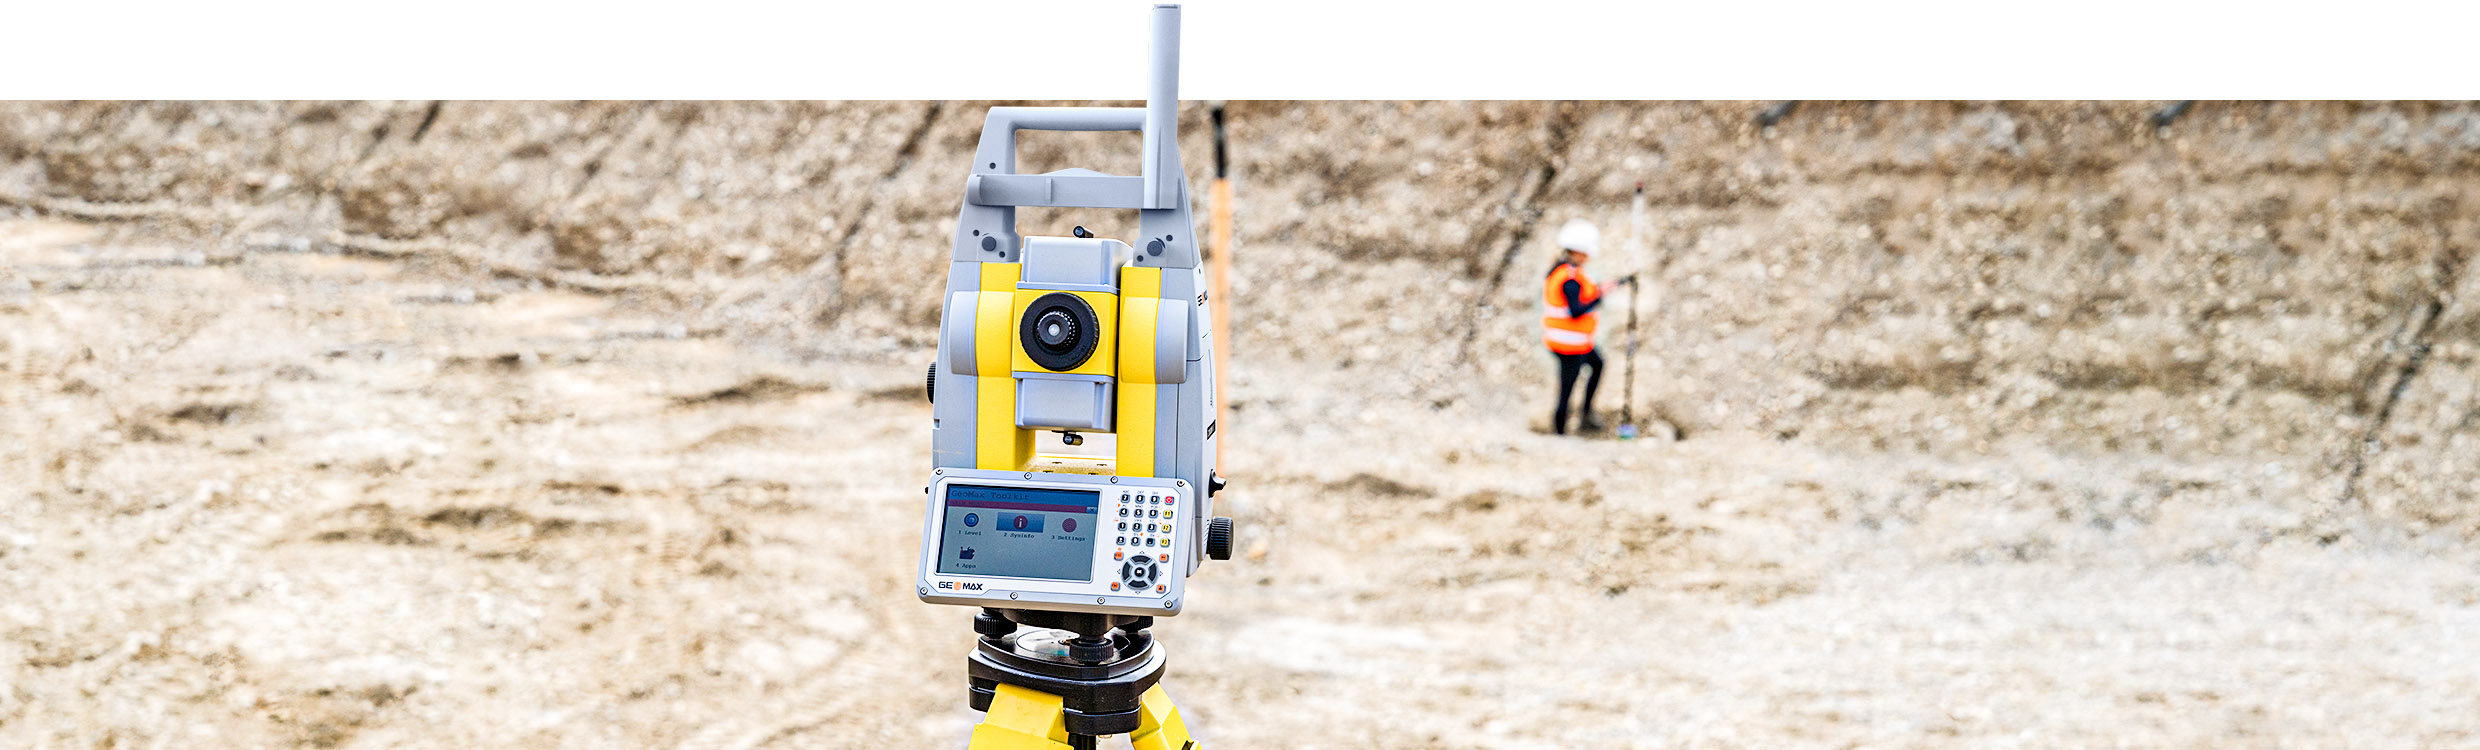 Geomax Zoom95 robotic total station on a tripod out in the field